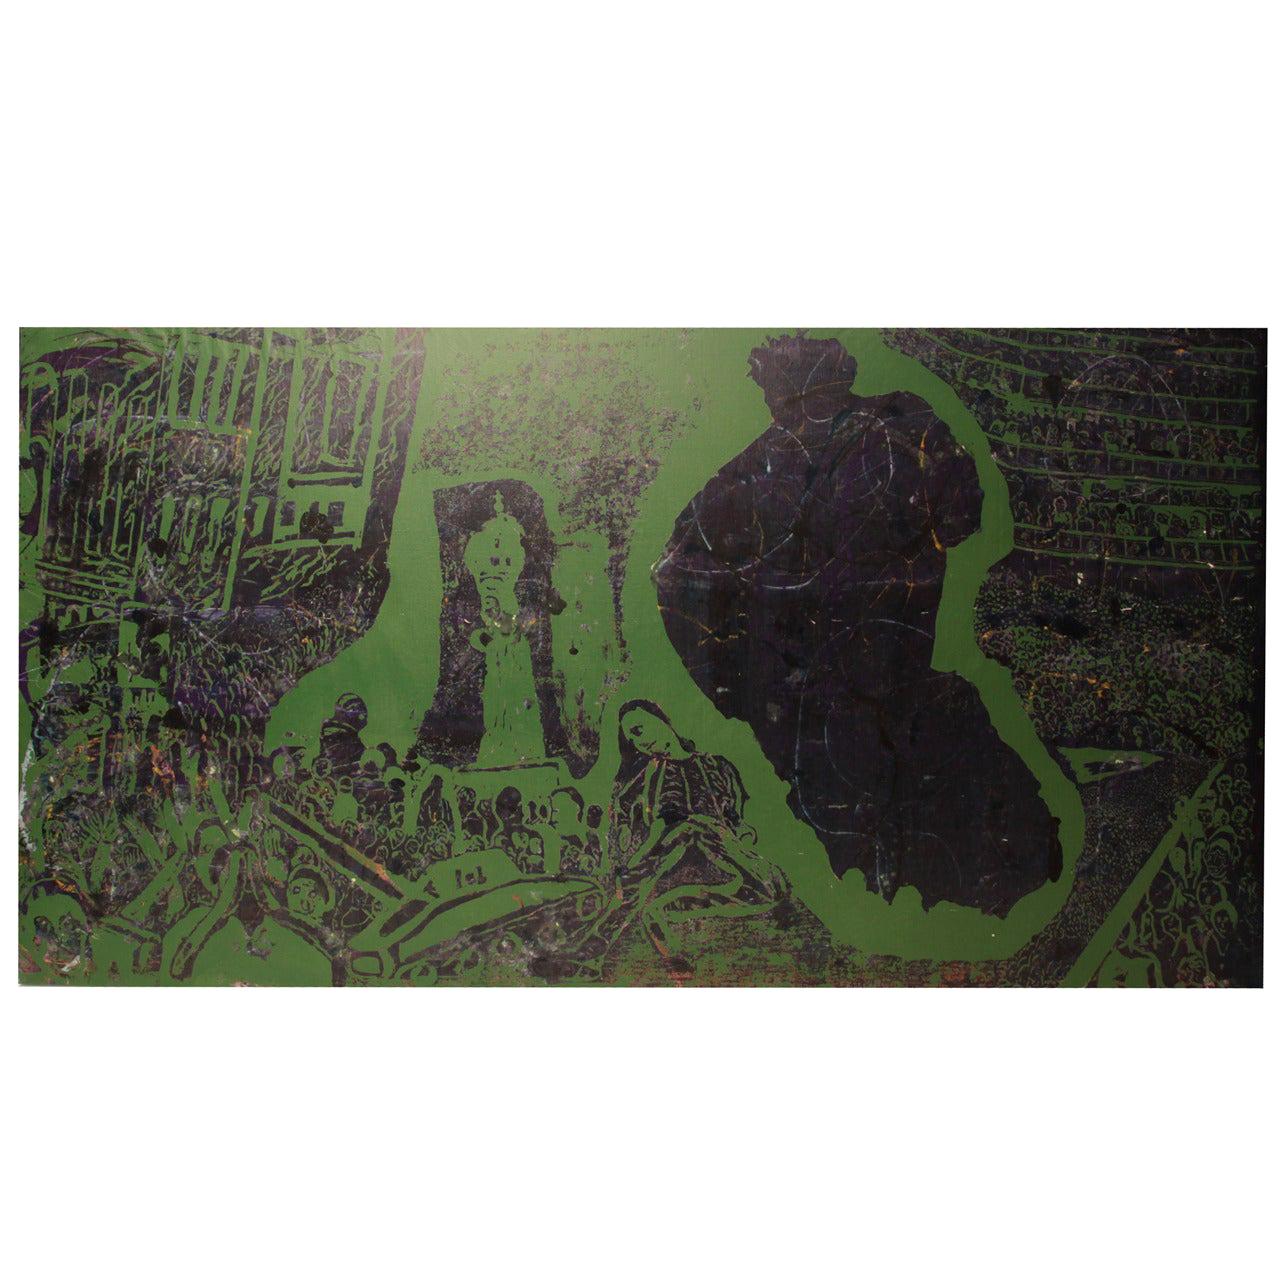 Steven Sles Monumental Painting No. 2 in Green